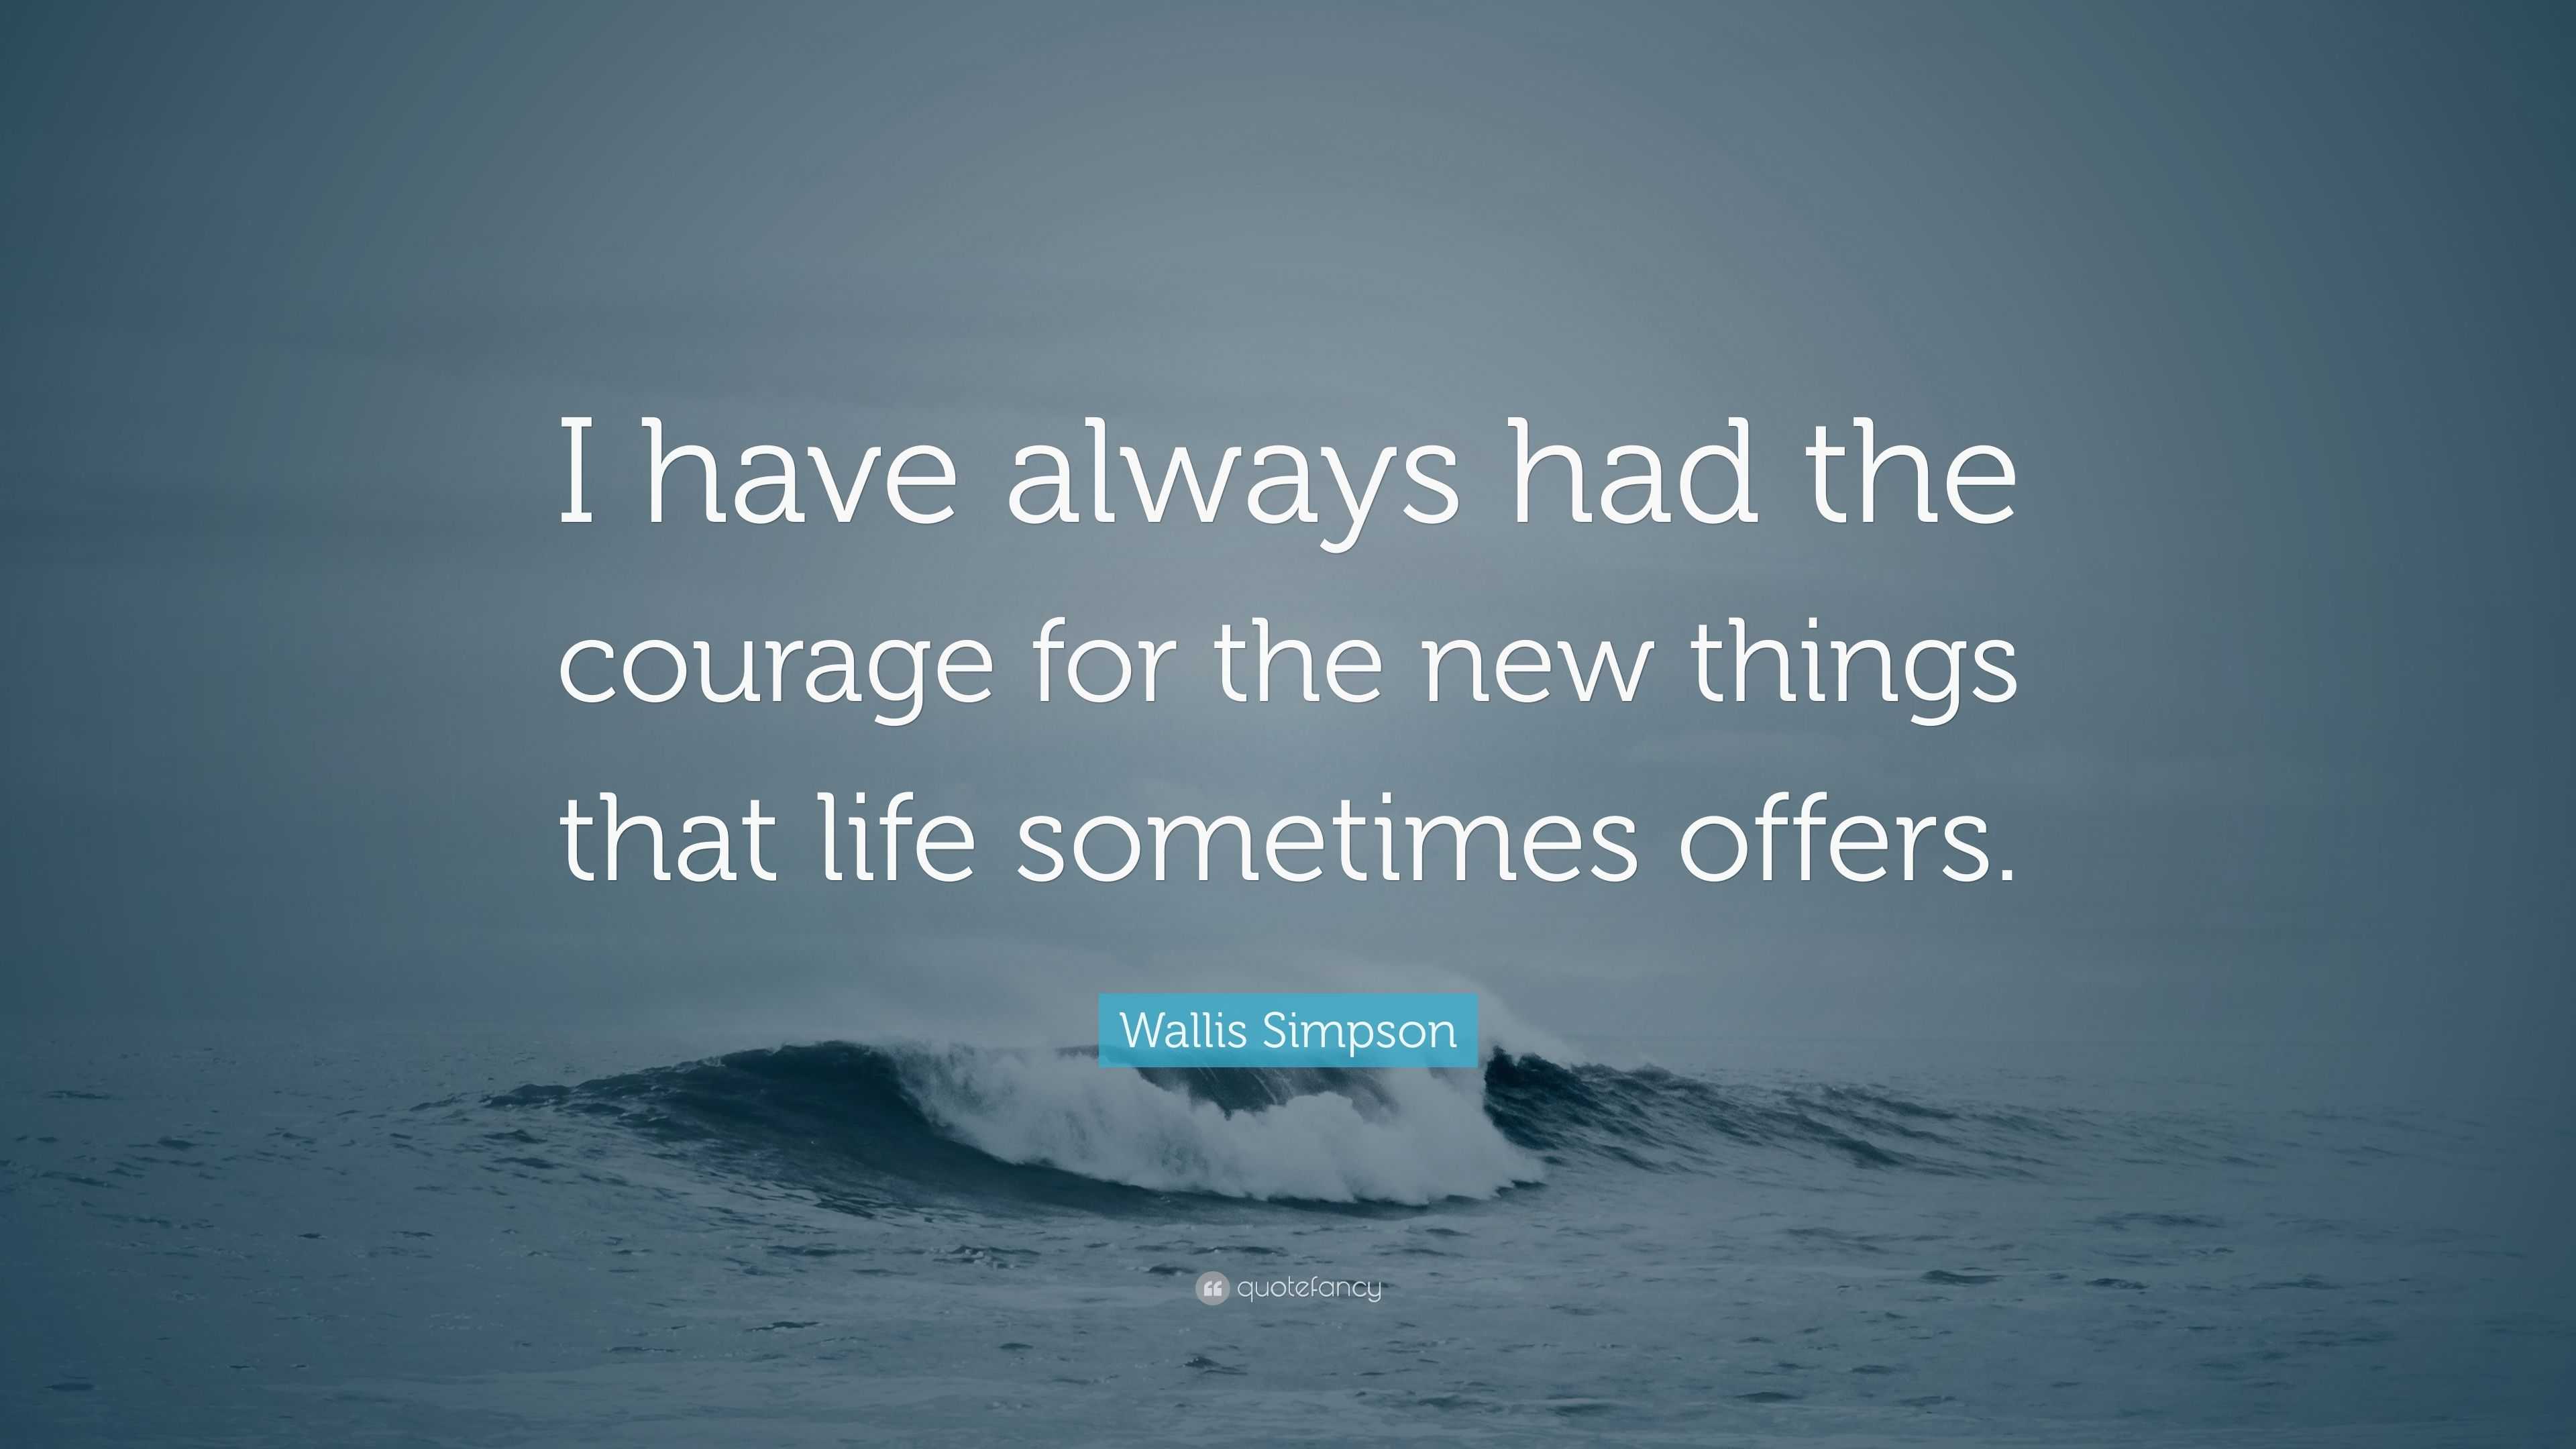 Wallis Simpson Quote: “I have always had the courage for the new things ...